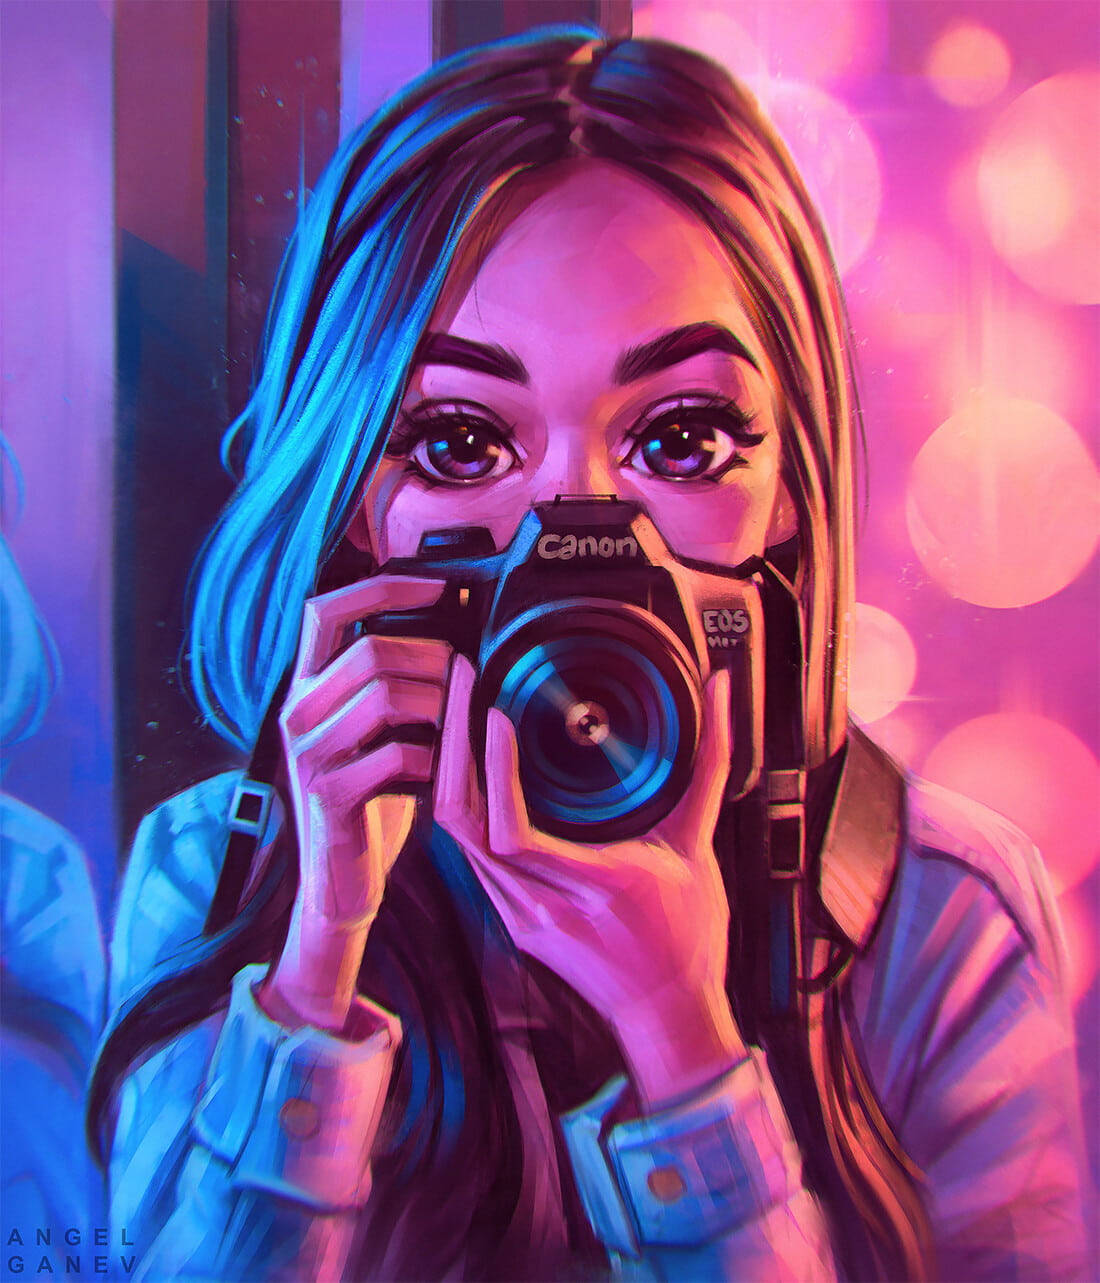 A Girl With A Dslr Camera Wallpaper